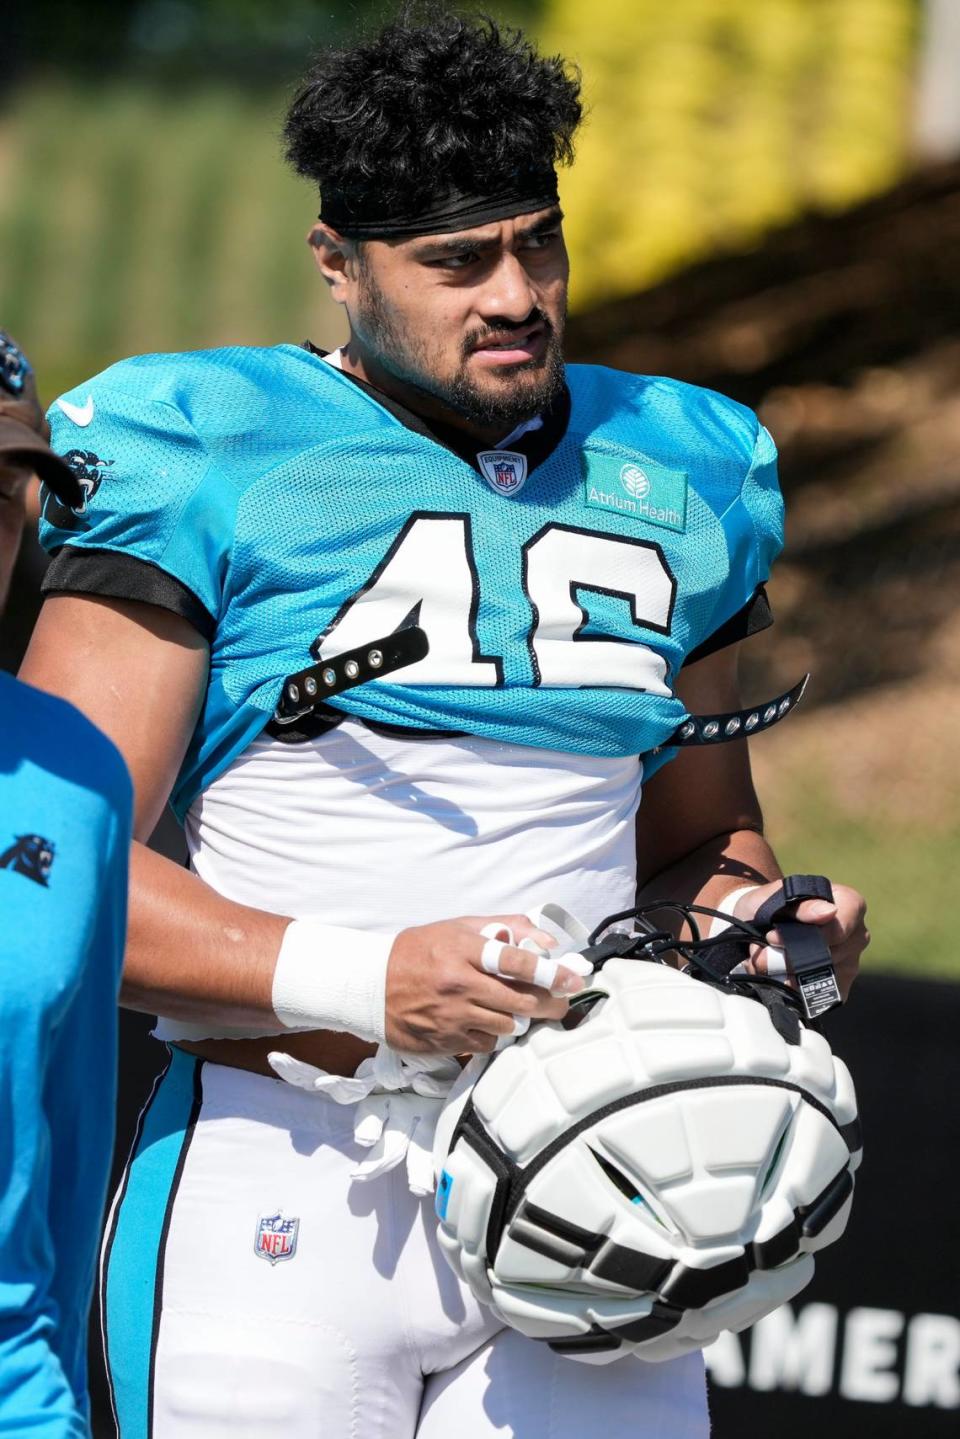 Carolina Panthers linebacker Eku Leota (46) walks to the practice fields during training camp at Wofford College.